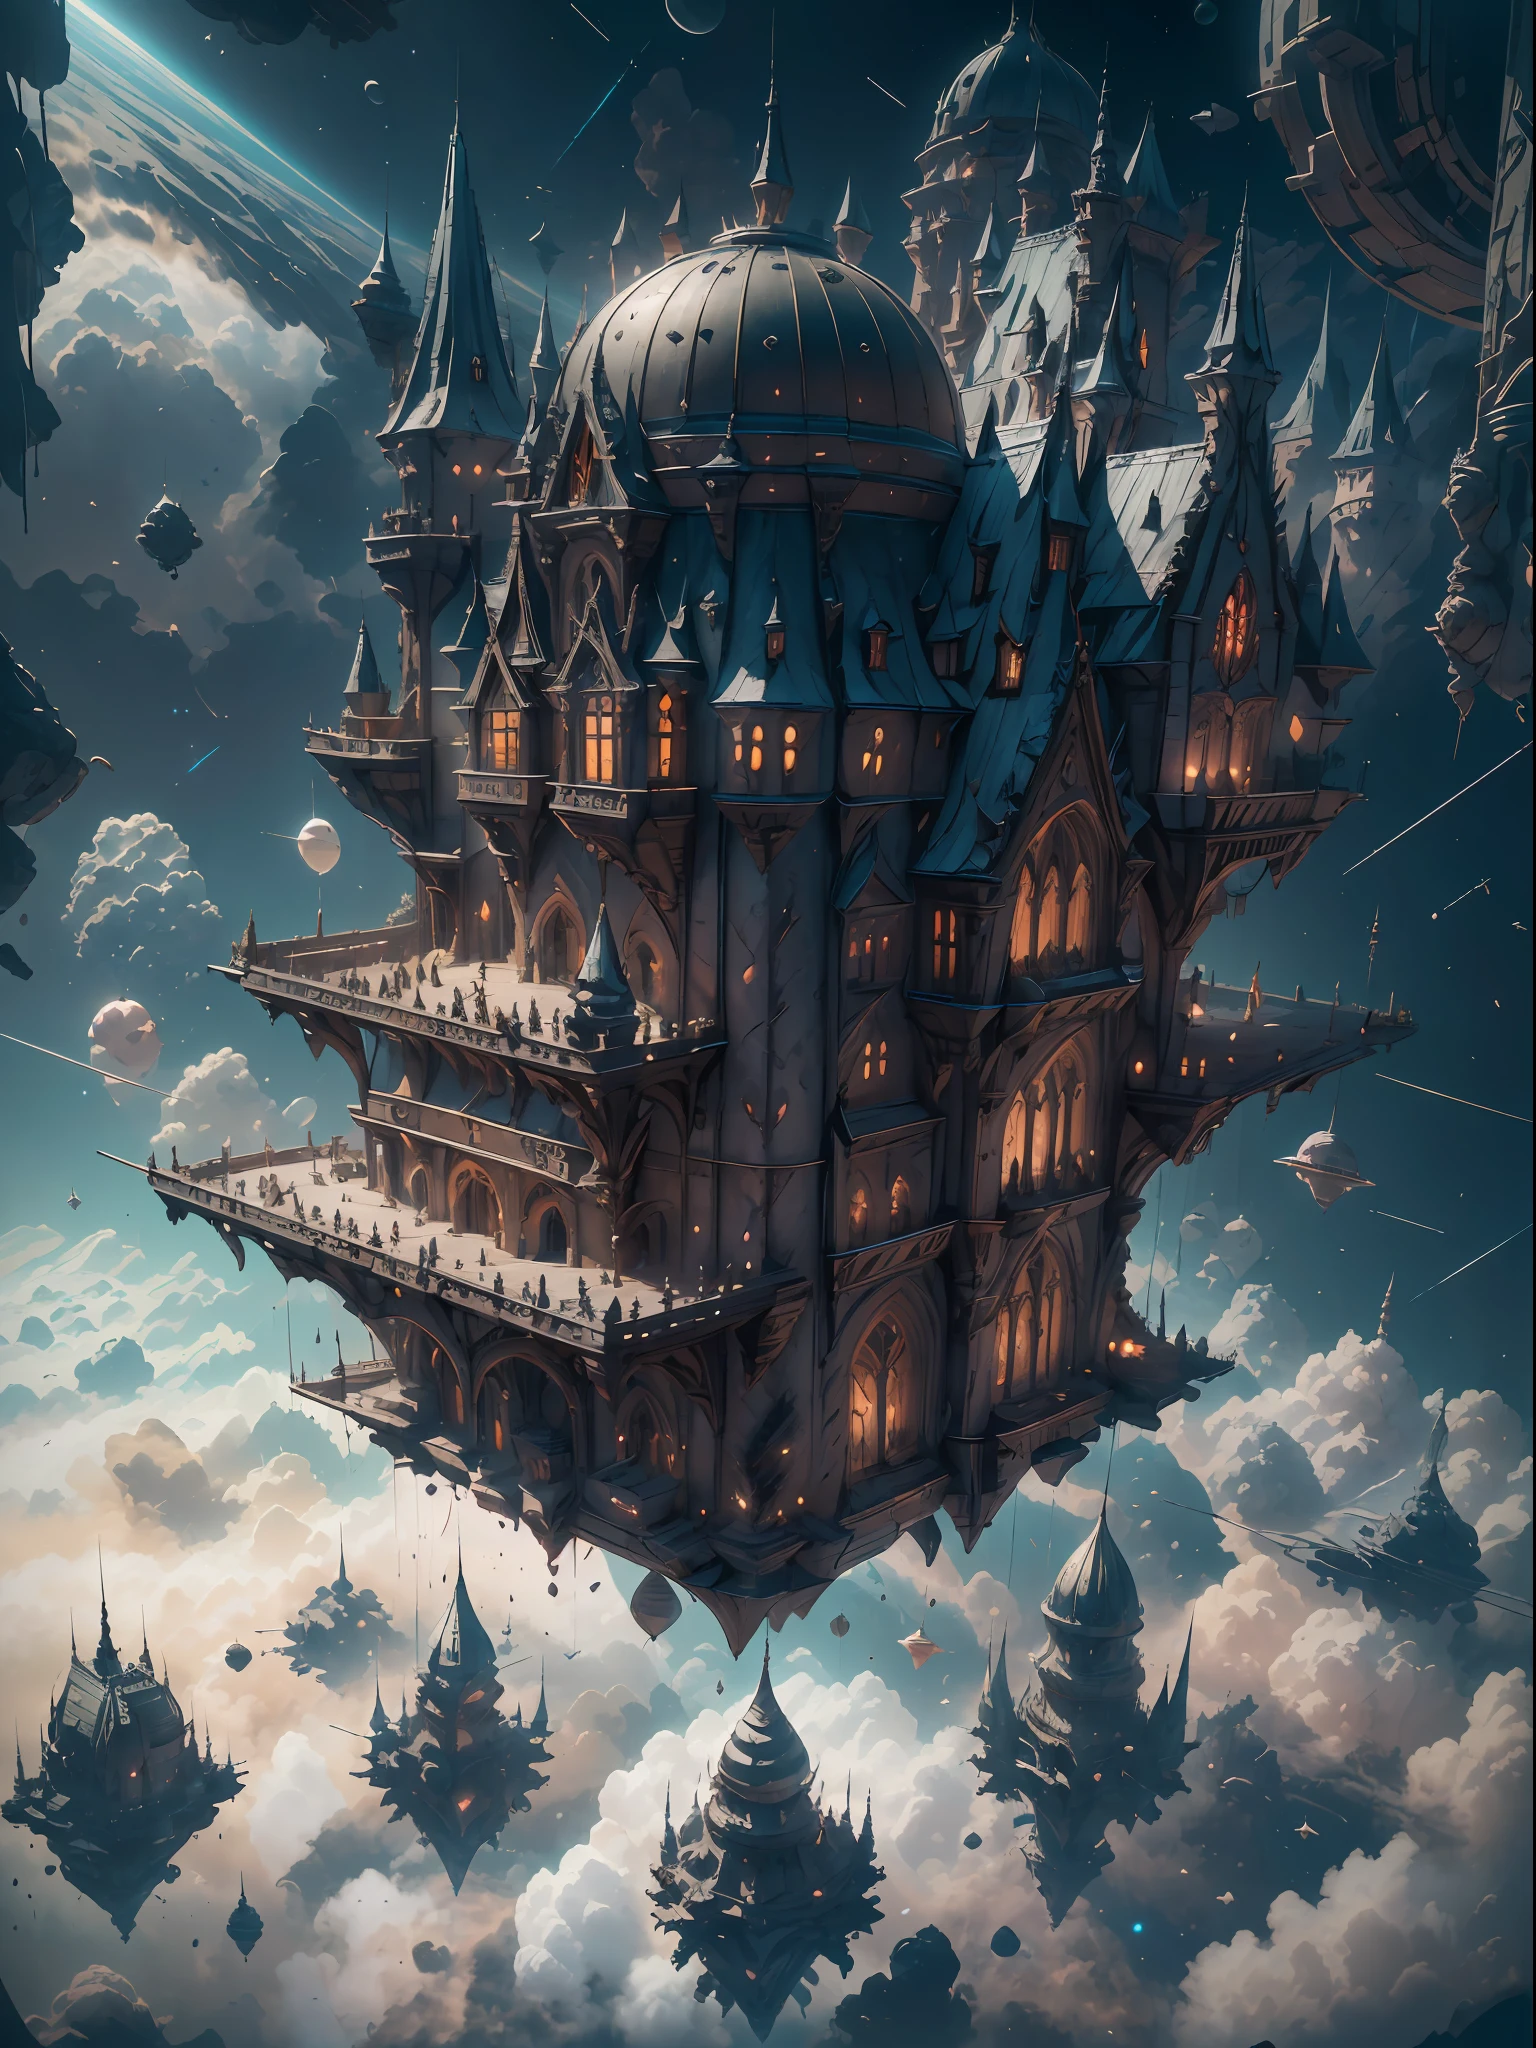 (1 dark Gothic castle - sculpture - castle:1.4)+((Detailed dark Gothic style castle - sculpture - castle floating above the clouds) ，(no gravity:1.3) (Some blood flew out from under the crystal sculpture castle)), (Intricate details:1.2),fantasy, Dark fairytale world,Light leakage, Detailed details glow,(Ray tracing),(Realistic:0.7), (3D:0.7), (OC renderer:0.7), BEST lighting, Masterpiece, Stunning, Super detailed, Highest quality, Uniform 8K wallpaper,Building